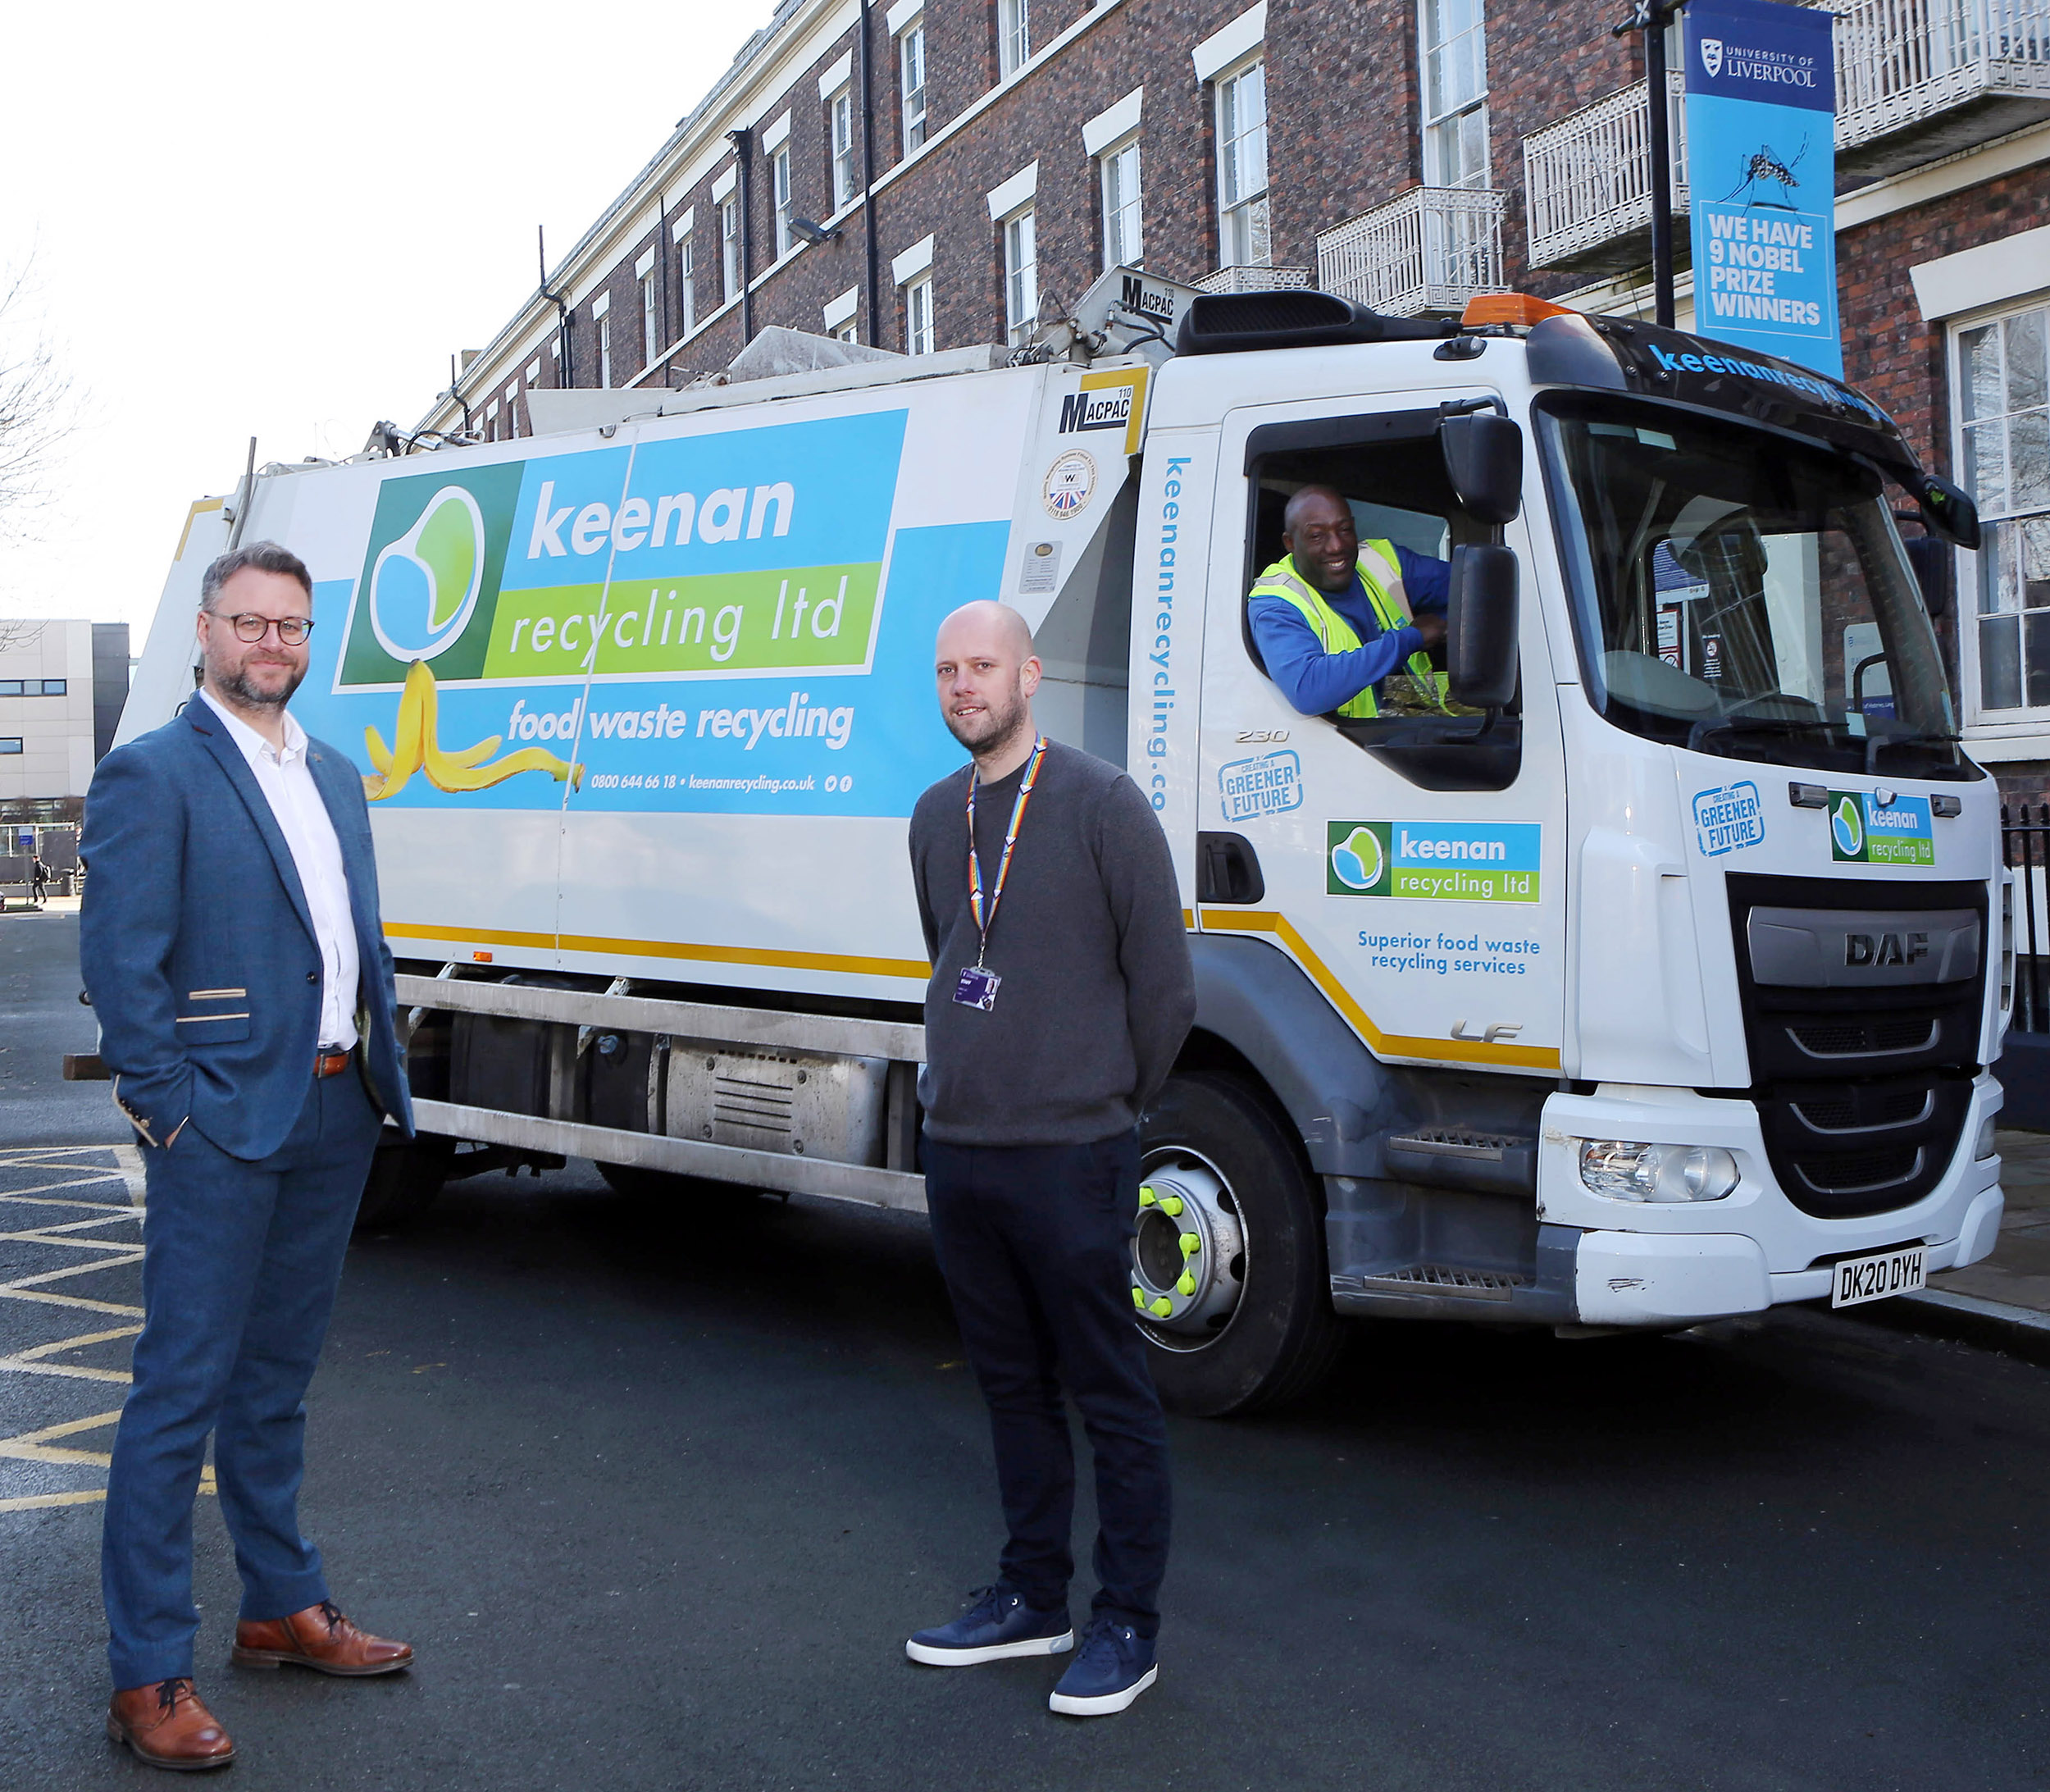 Gary Mills and Mark Coleman from Keenan Recycling with Sam Hay from The University of Liverpool